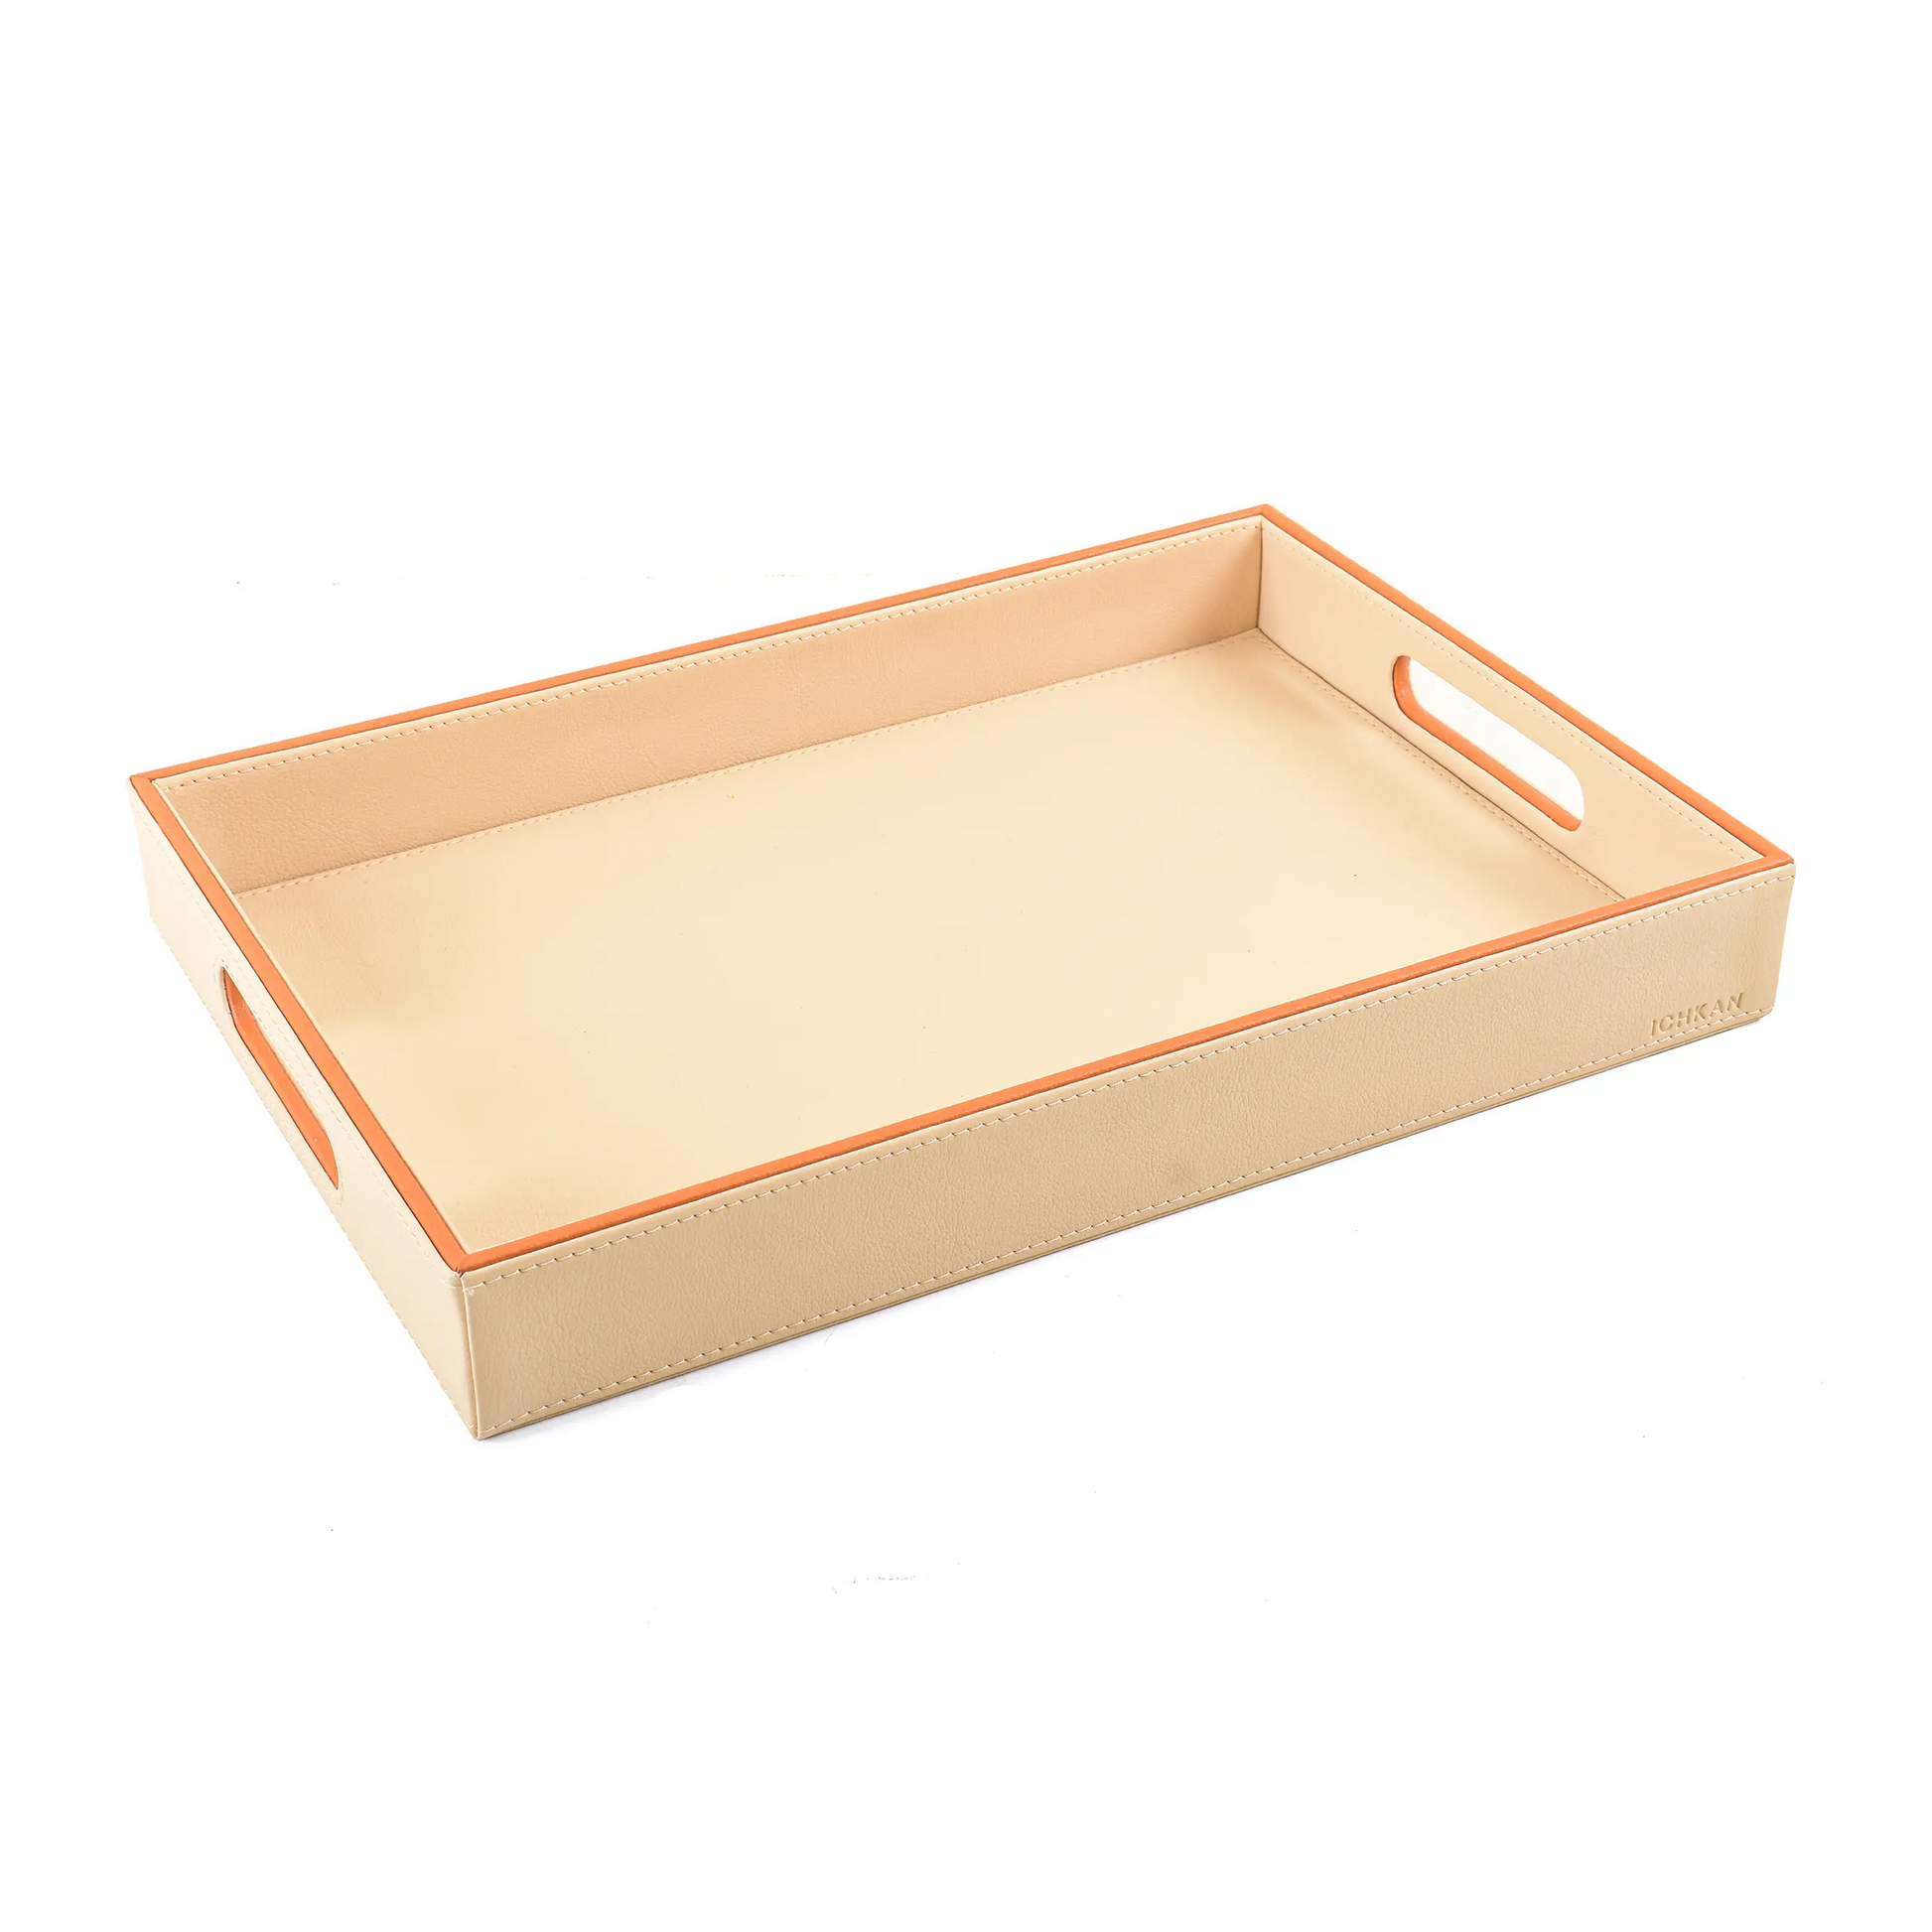 Leatherette Rectangle Serving Tray Set of 2 | Beige | Axis 2.0 ICHKAN